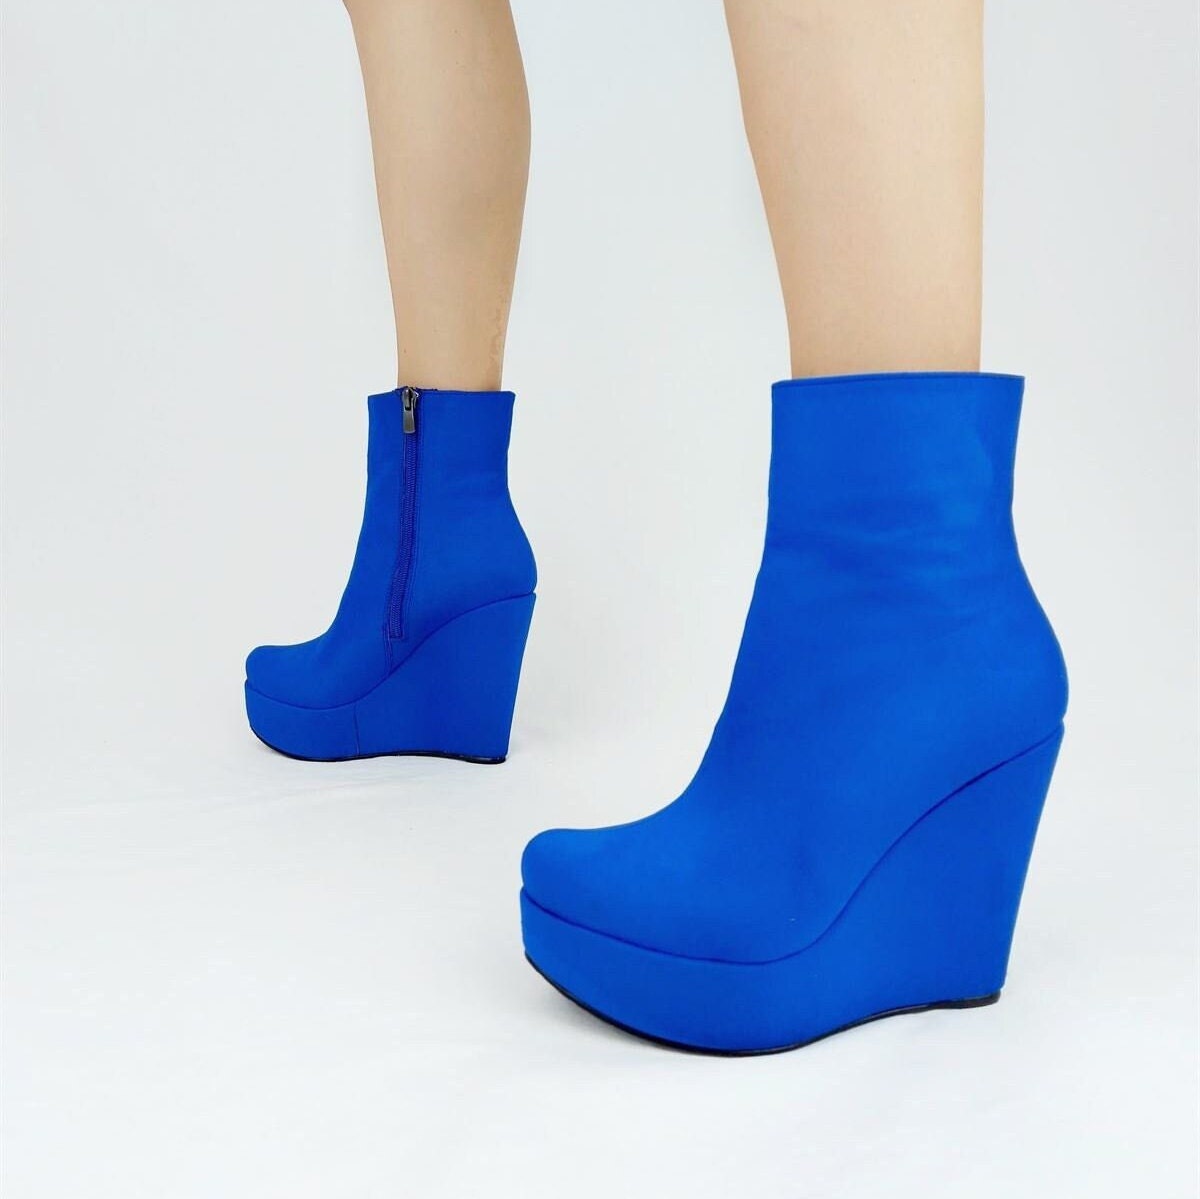 BLUE WEDGE BOOTS Blue Suede Leather Boots Wedge Heels With